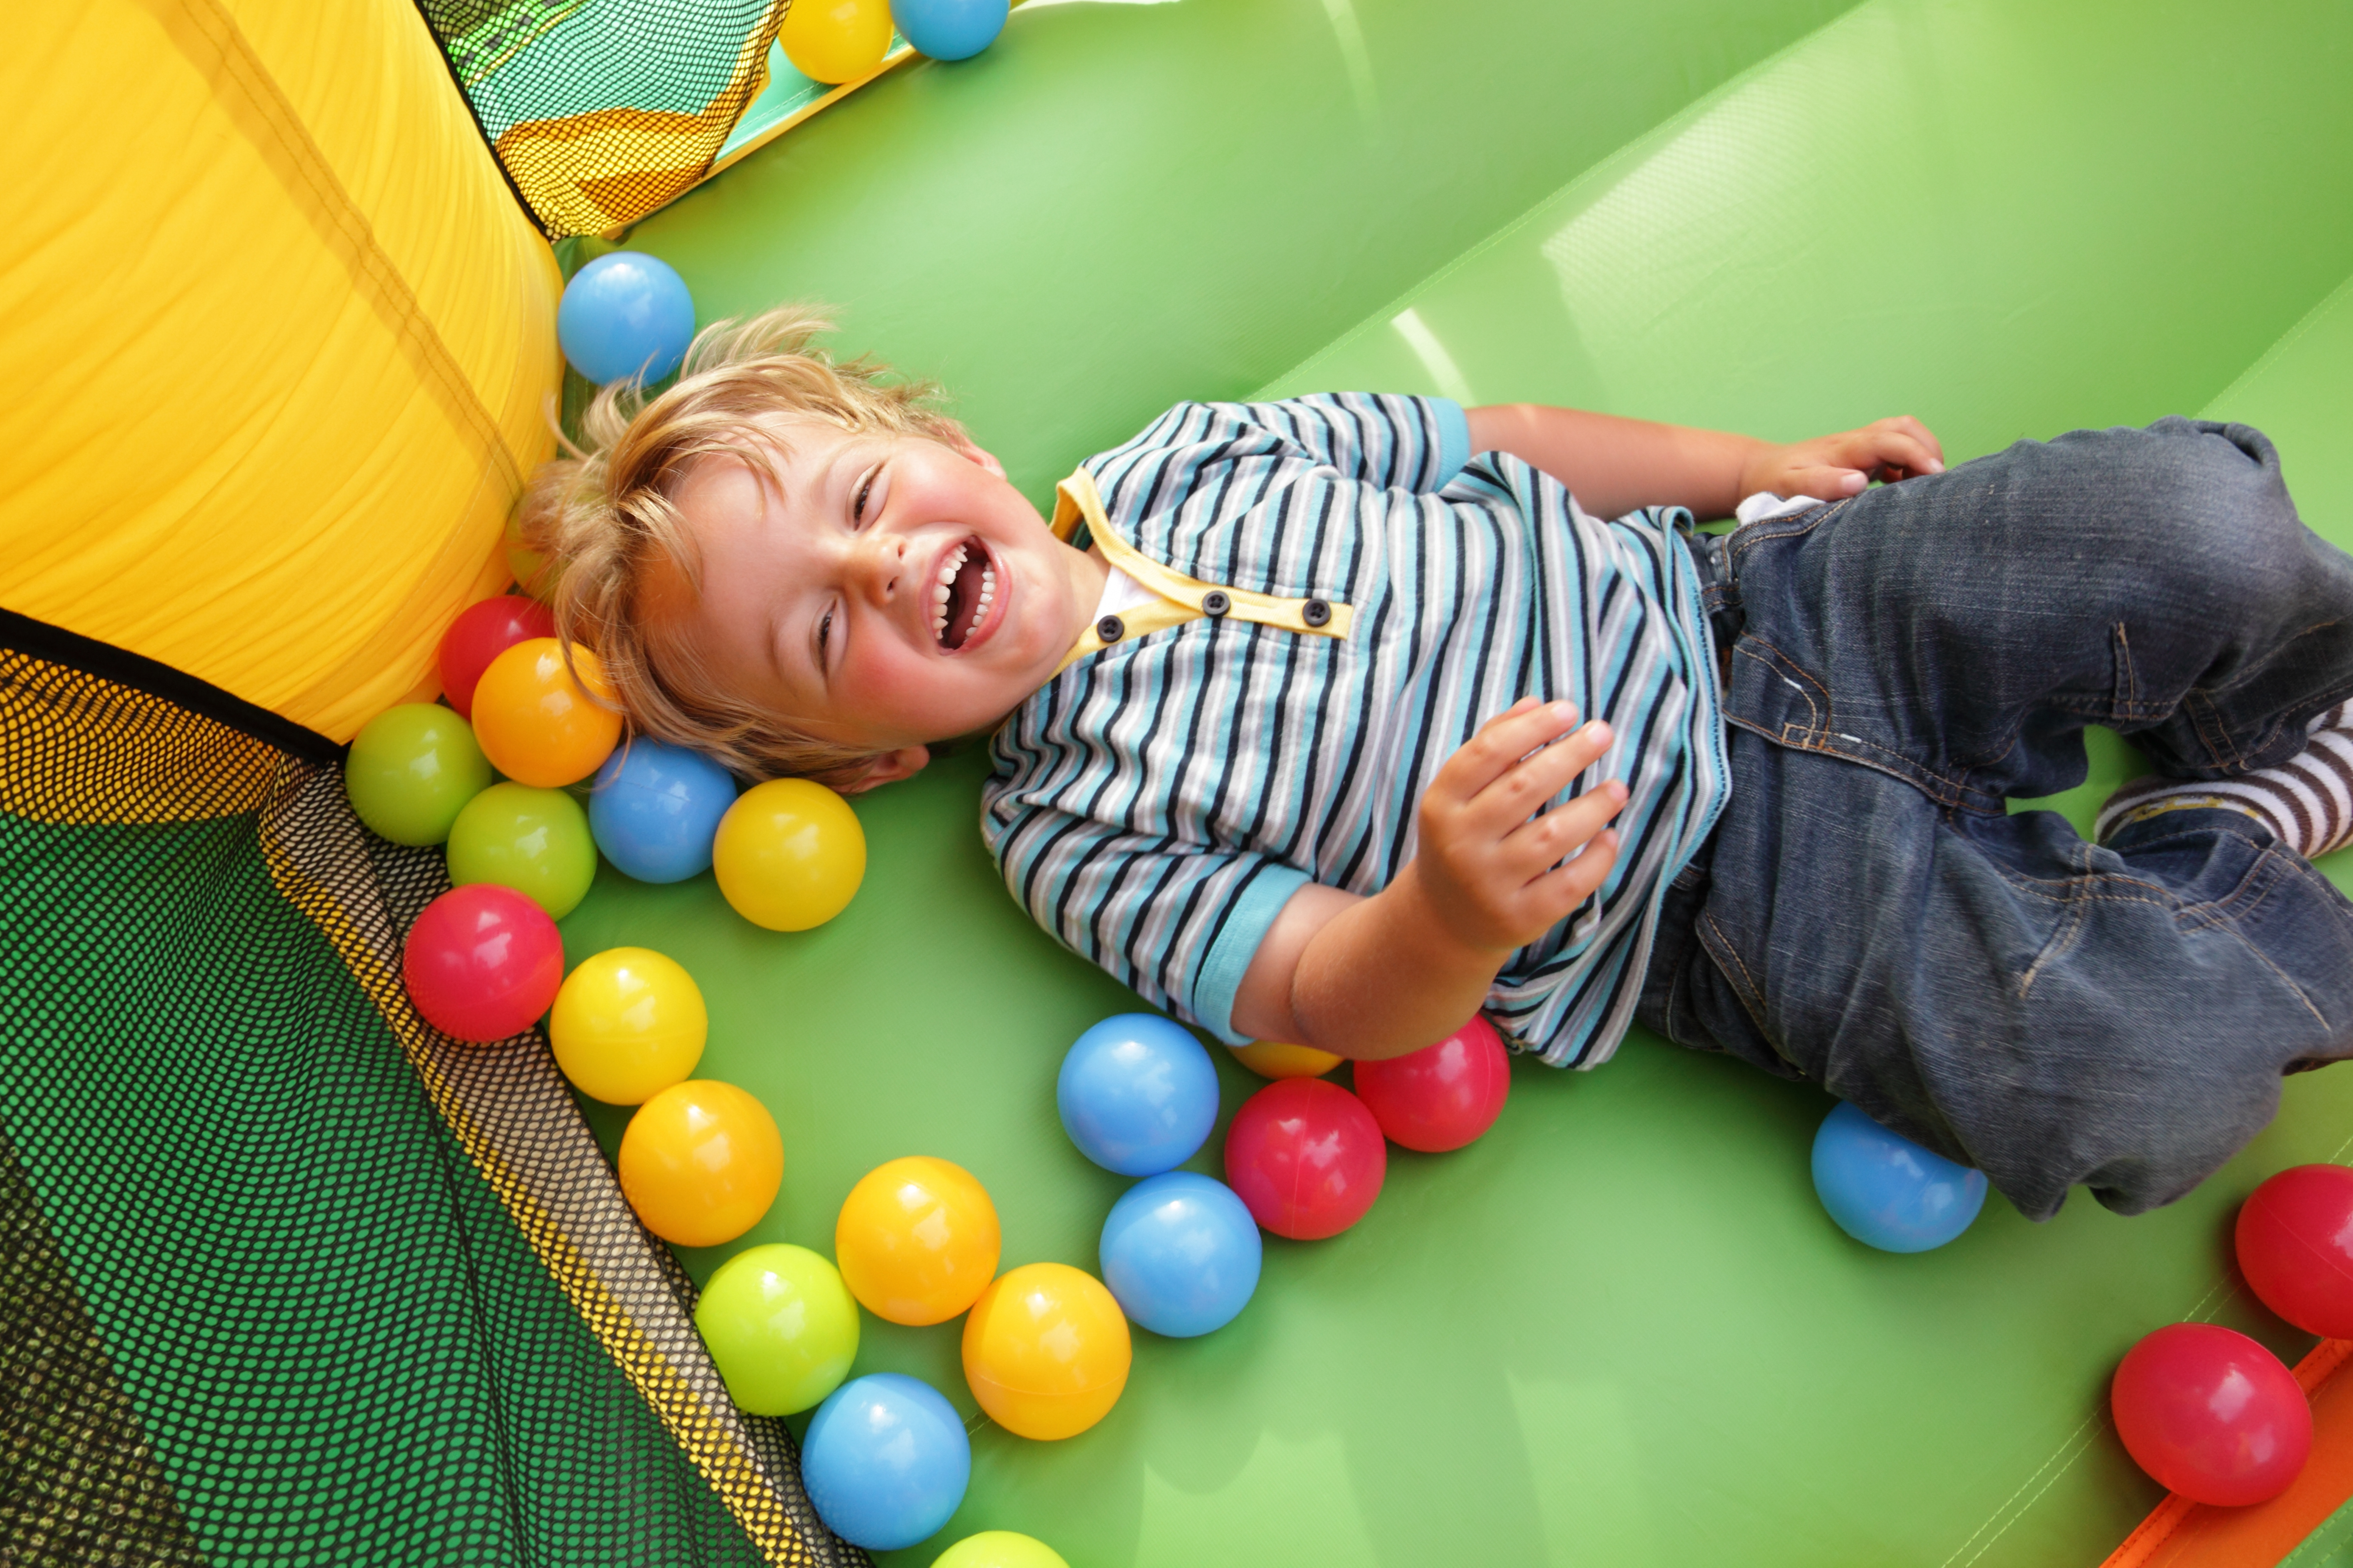 3-years-old boy is lying and laughing | Source: Shutterstock.com